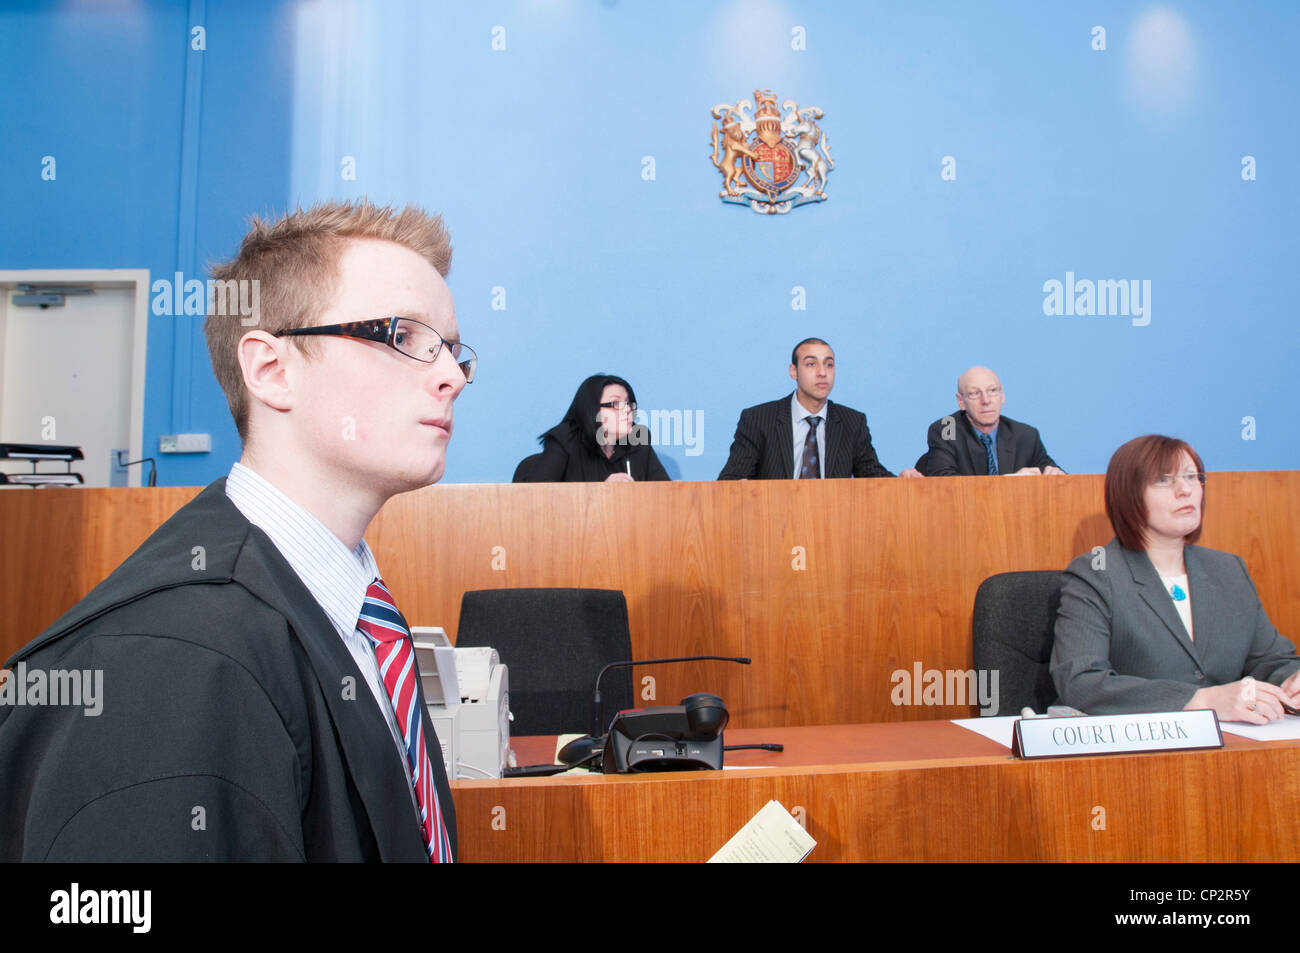 The Bench in a Magistrates' Court Stock Photo